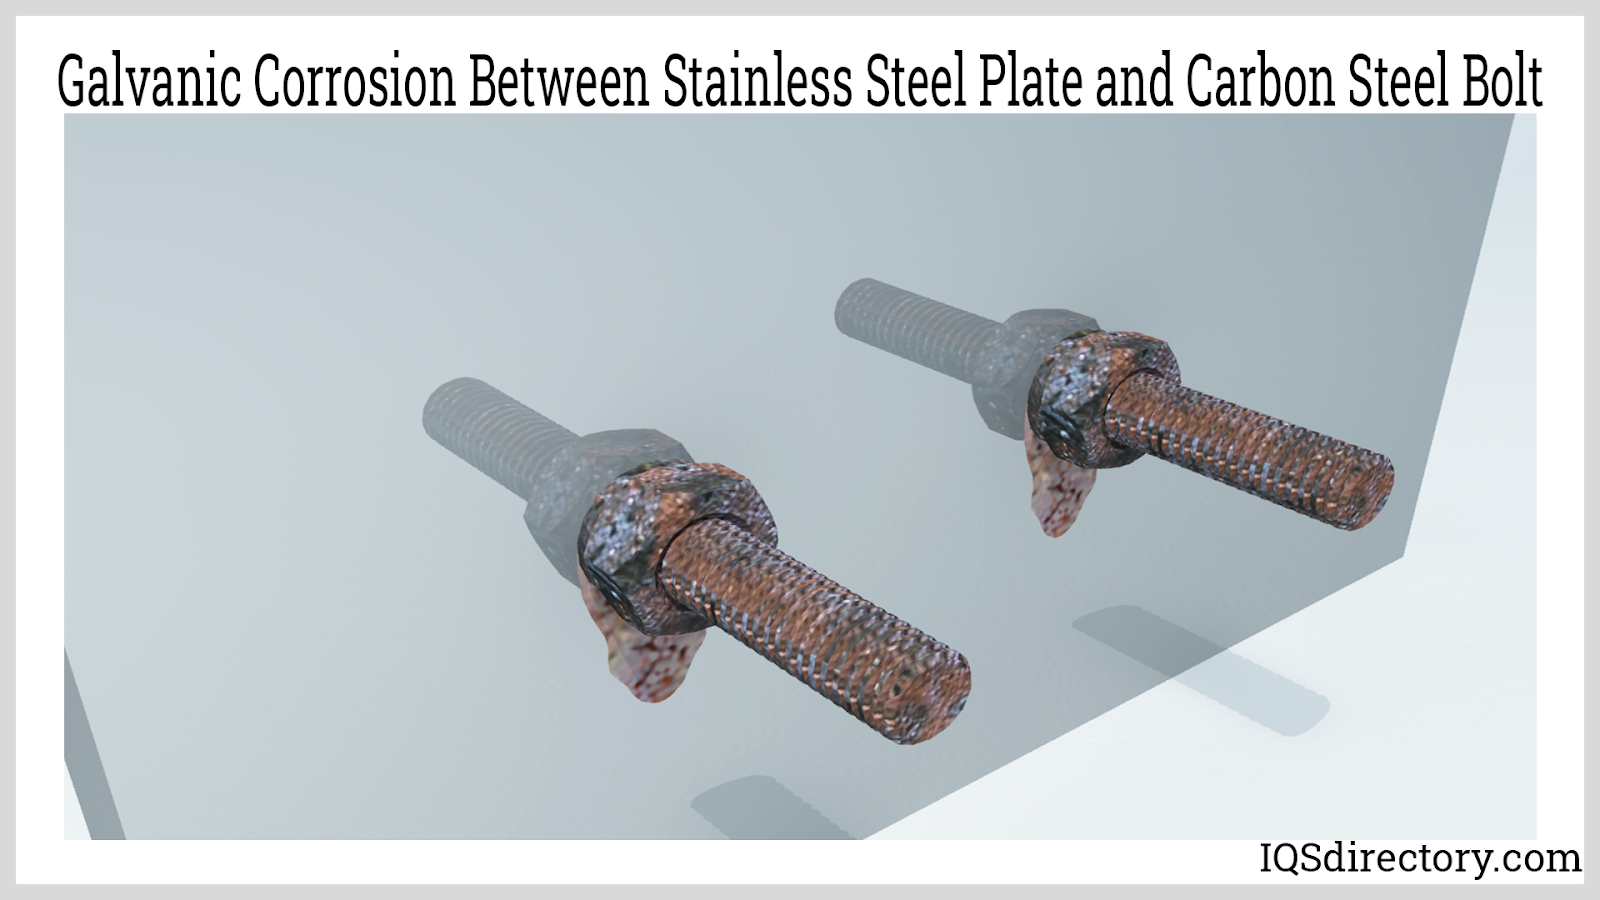 Galvanic Corrosion Between Stainless Steel Plate and Carbon Steel Bolt